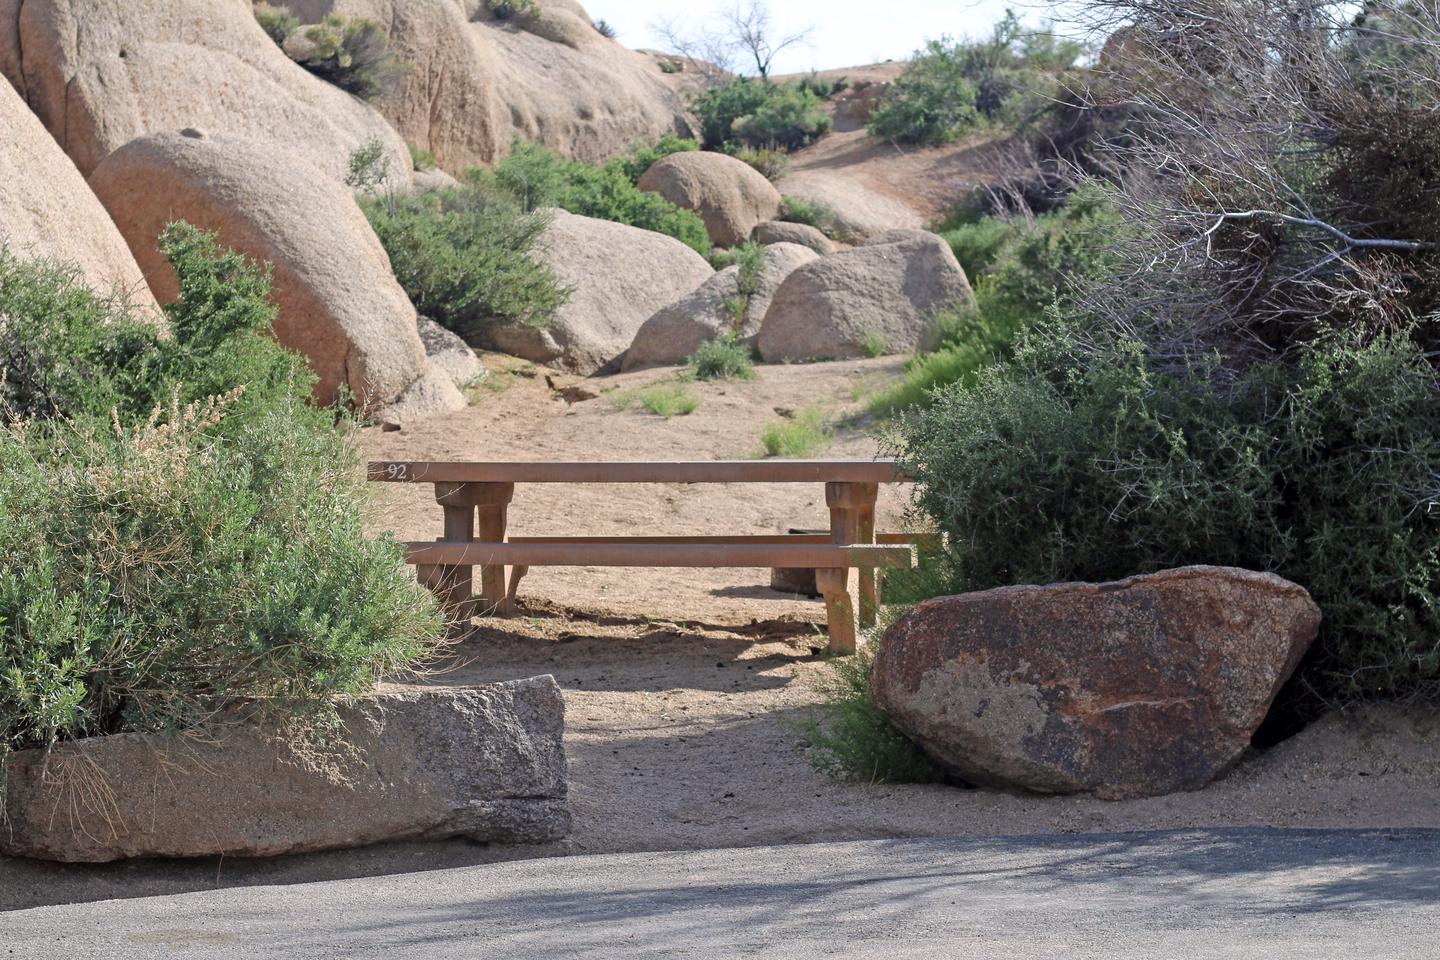 Campsite  with picnic table surrounded by boulders and green plants.Campsite.